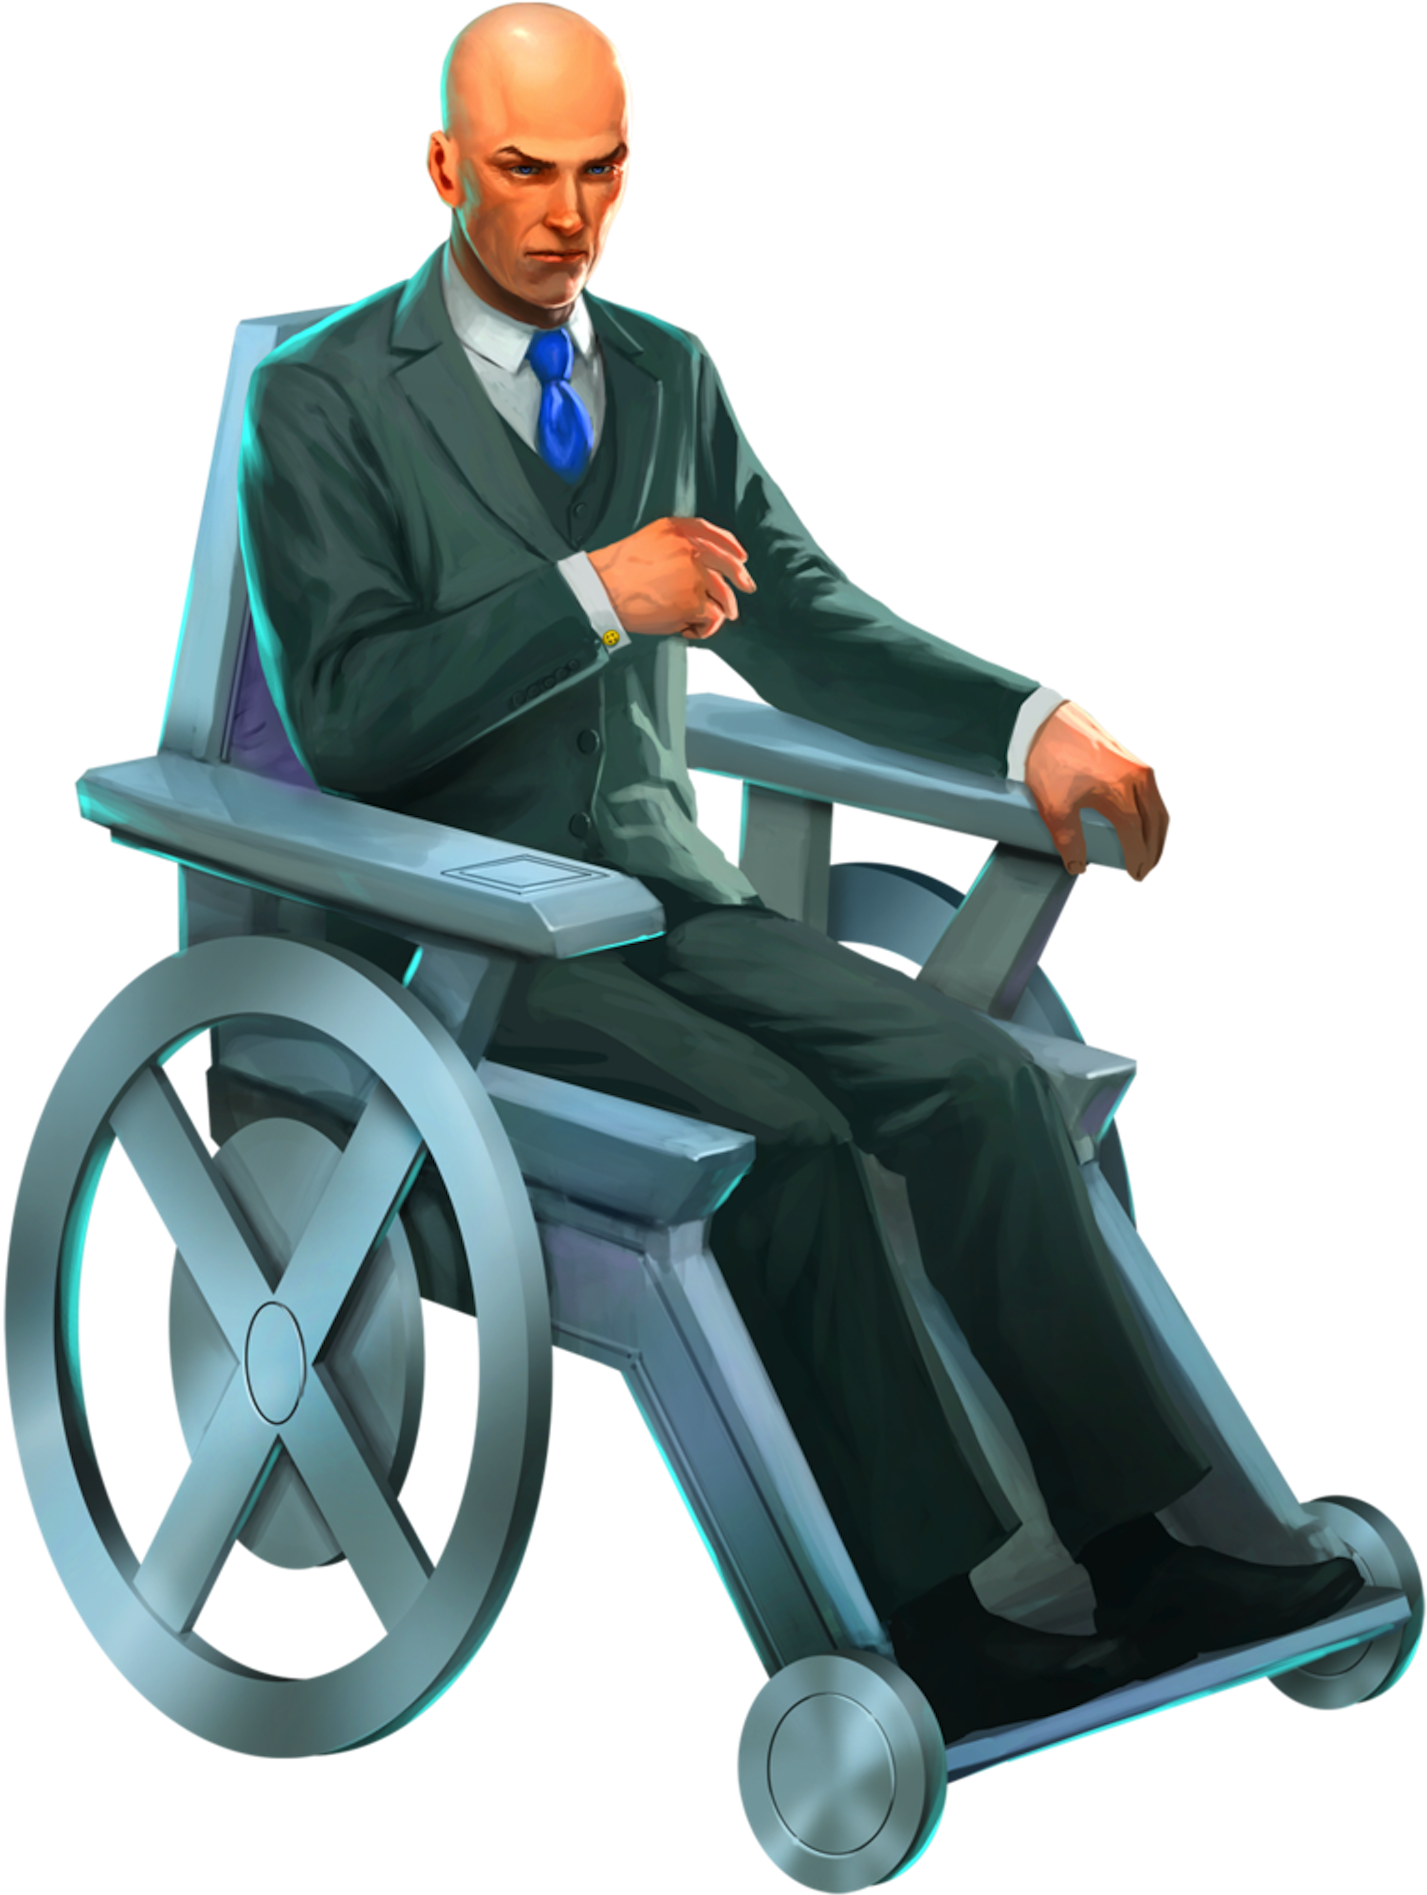 A Man In A Suit And Tie Sitting In A Wheelchair